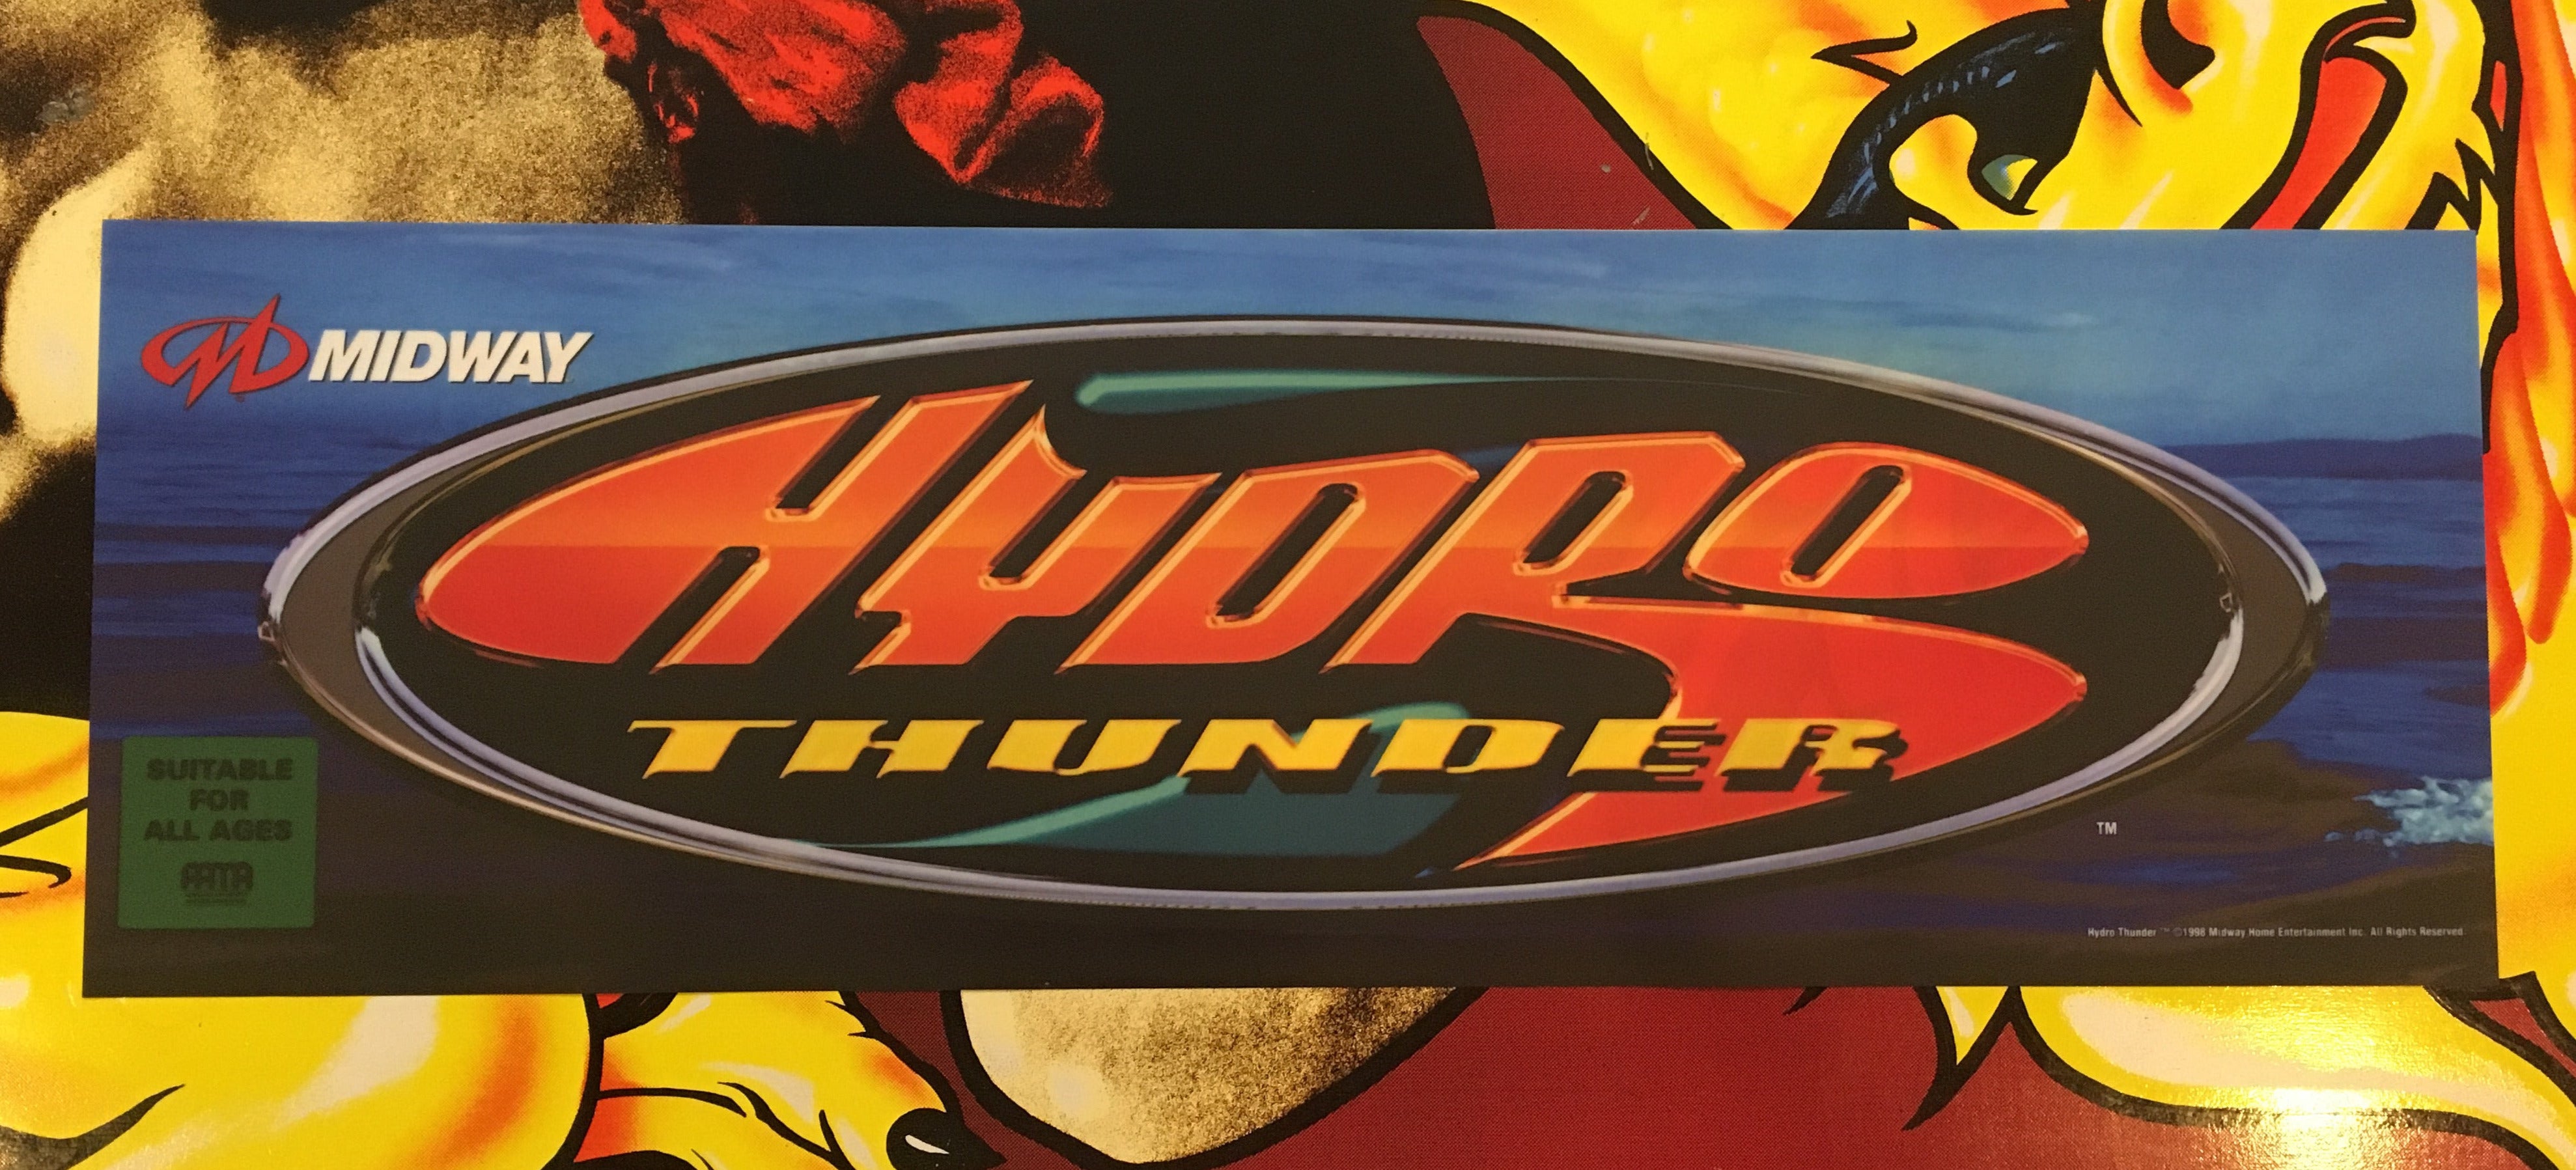 Hydro Thunder Marquee